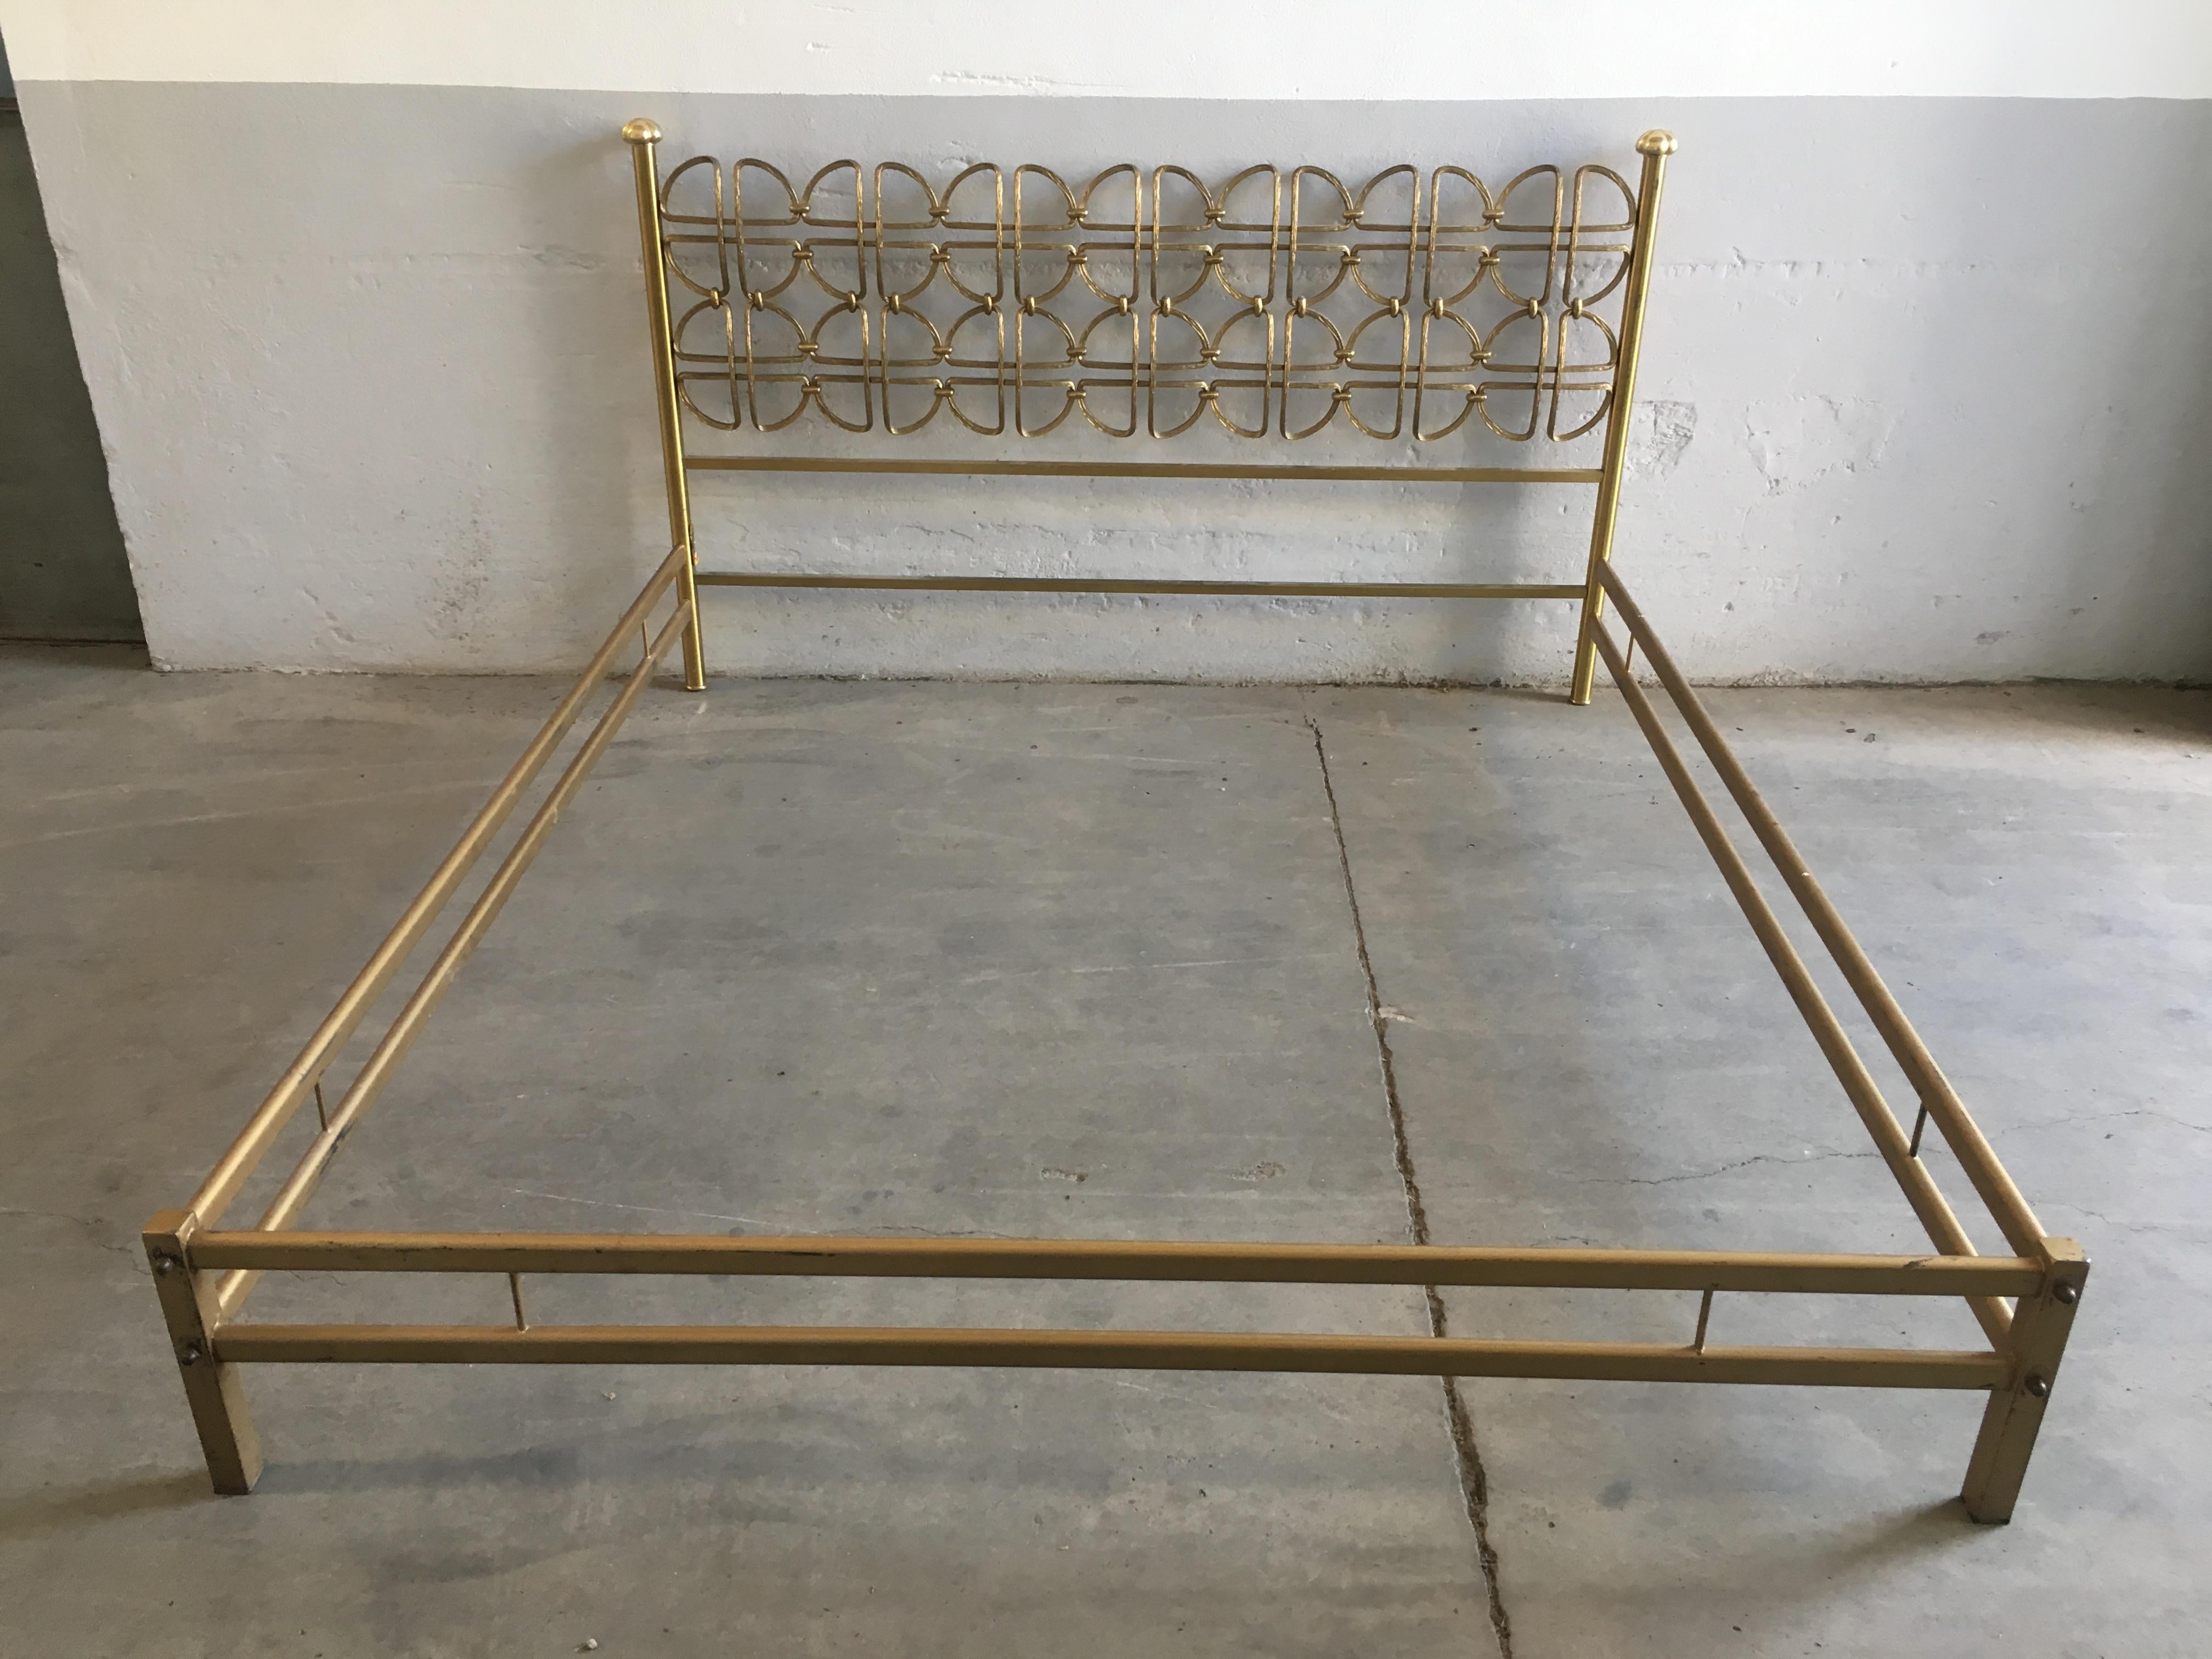 Mid-Century Modern Italian solid brass double bed in the style of Borsani.
The bed head is in solid brass and the other parts of the bed are in gilt metal
The bed needs a mattress cm.165 x 195 (queen size).